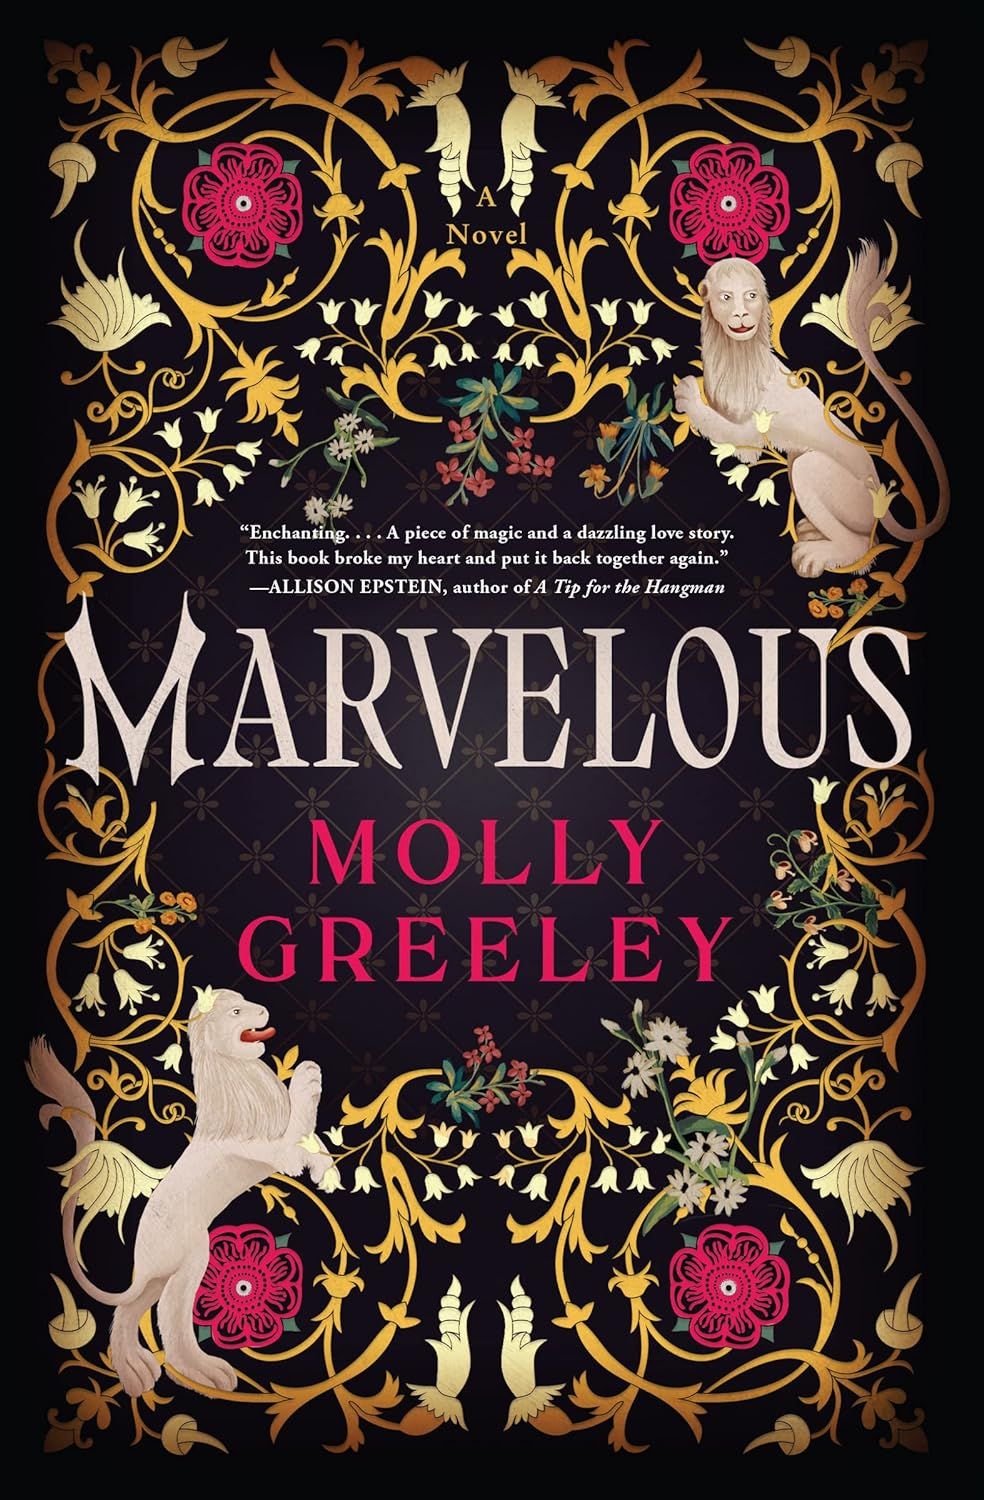 the cover of Marvelous by Molly Greeley